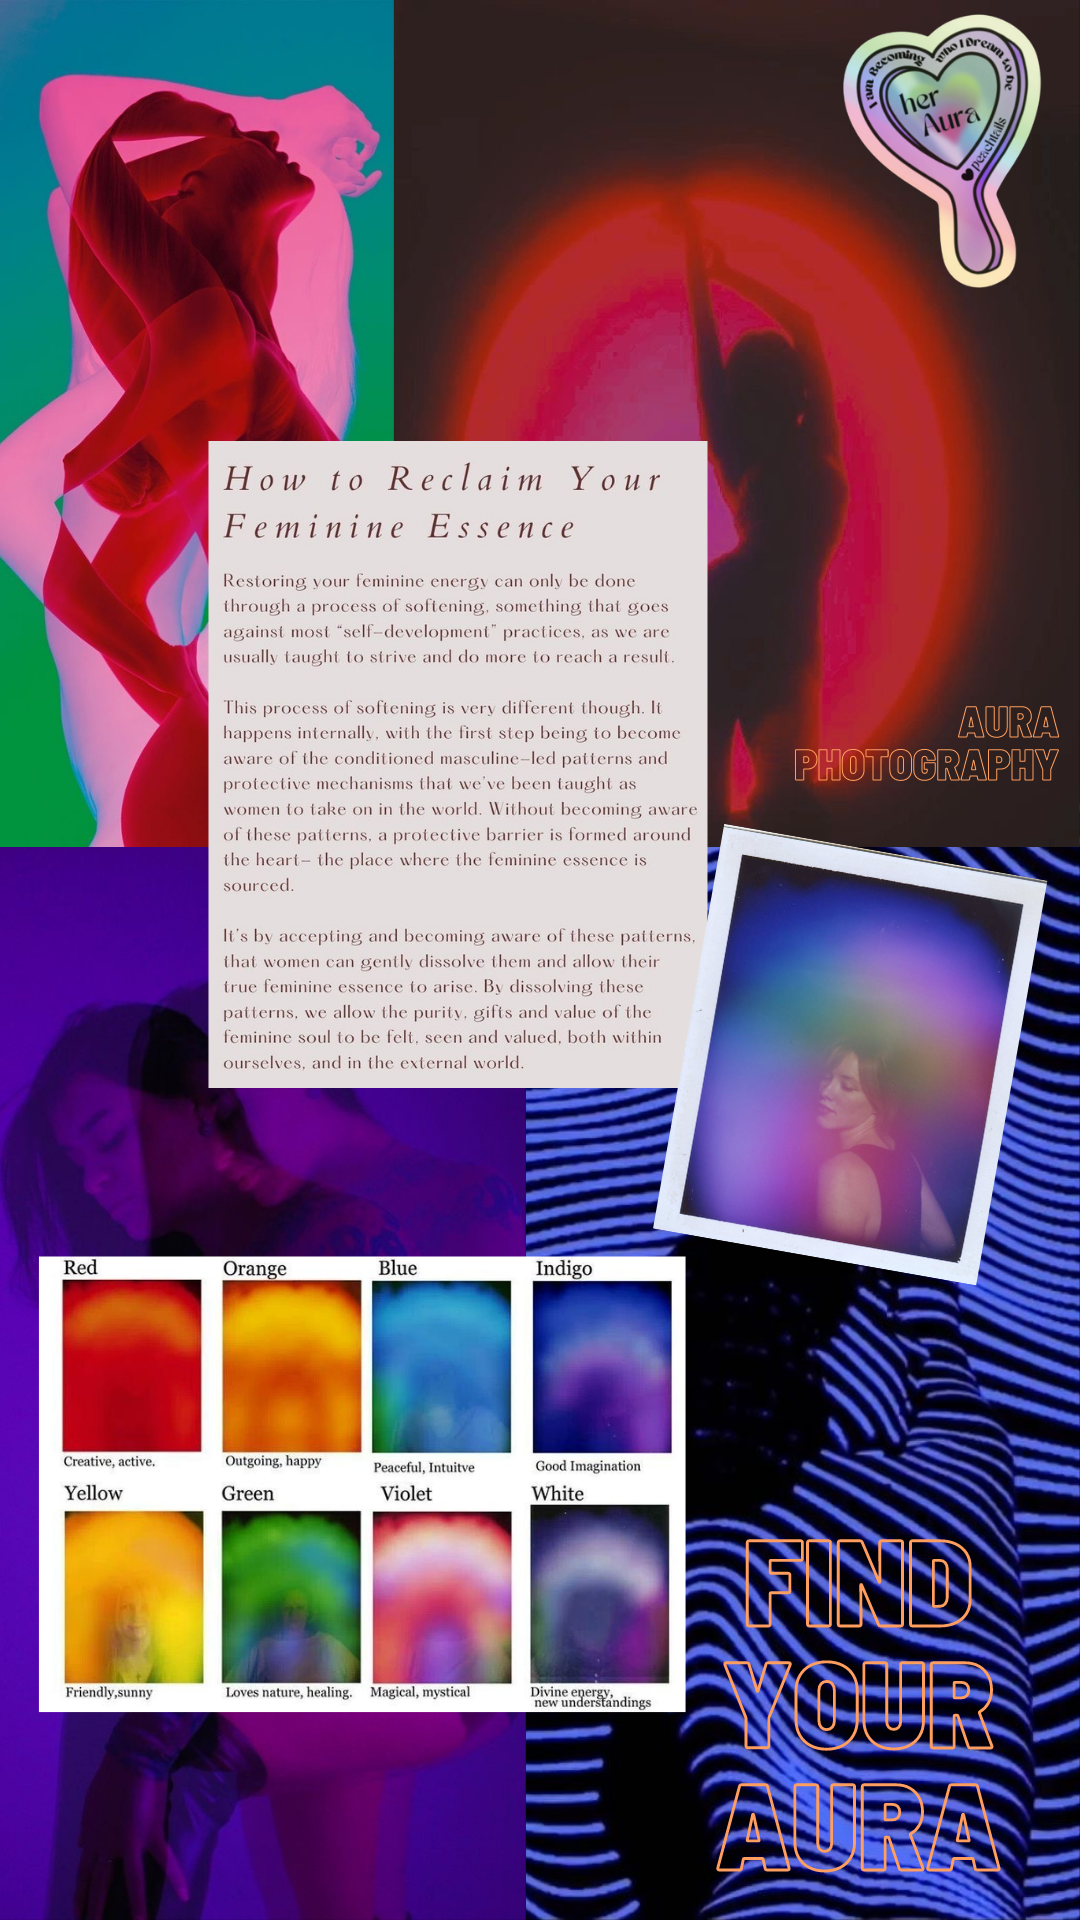 The image is a colorful poster about reclaiming one's feminine essence, with a central theme of aura photography. It features images of women with vibrant aura-like glows, a heart-shaped graphic with the text "Aura Photography," and a section titled "Find Your Aura" with colorful aura interpretations. The design is modern and eye-catching, blending spirituality with a new age vibe.